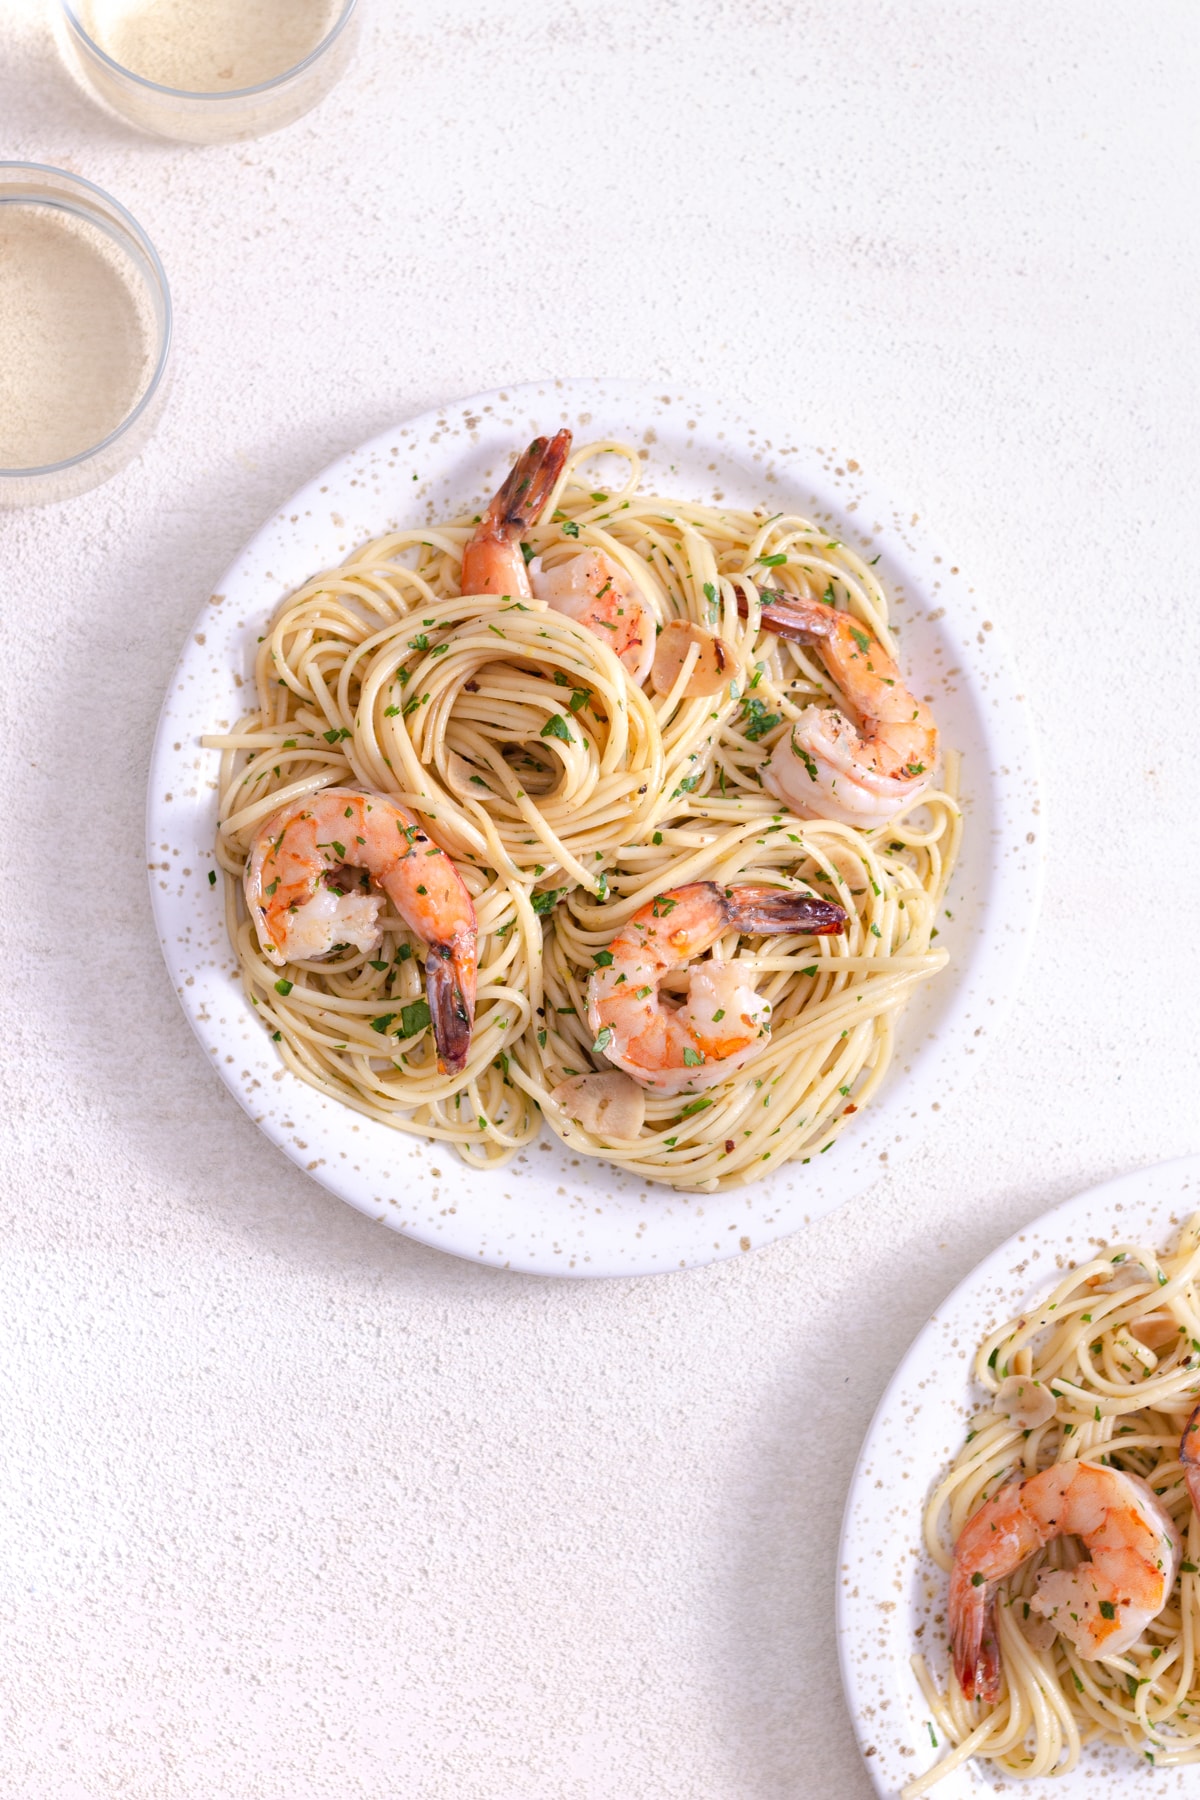 Overhead view of a plate of lemon garlic shrimp pasta next to glasses of wine on a white plaster surface.